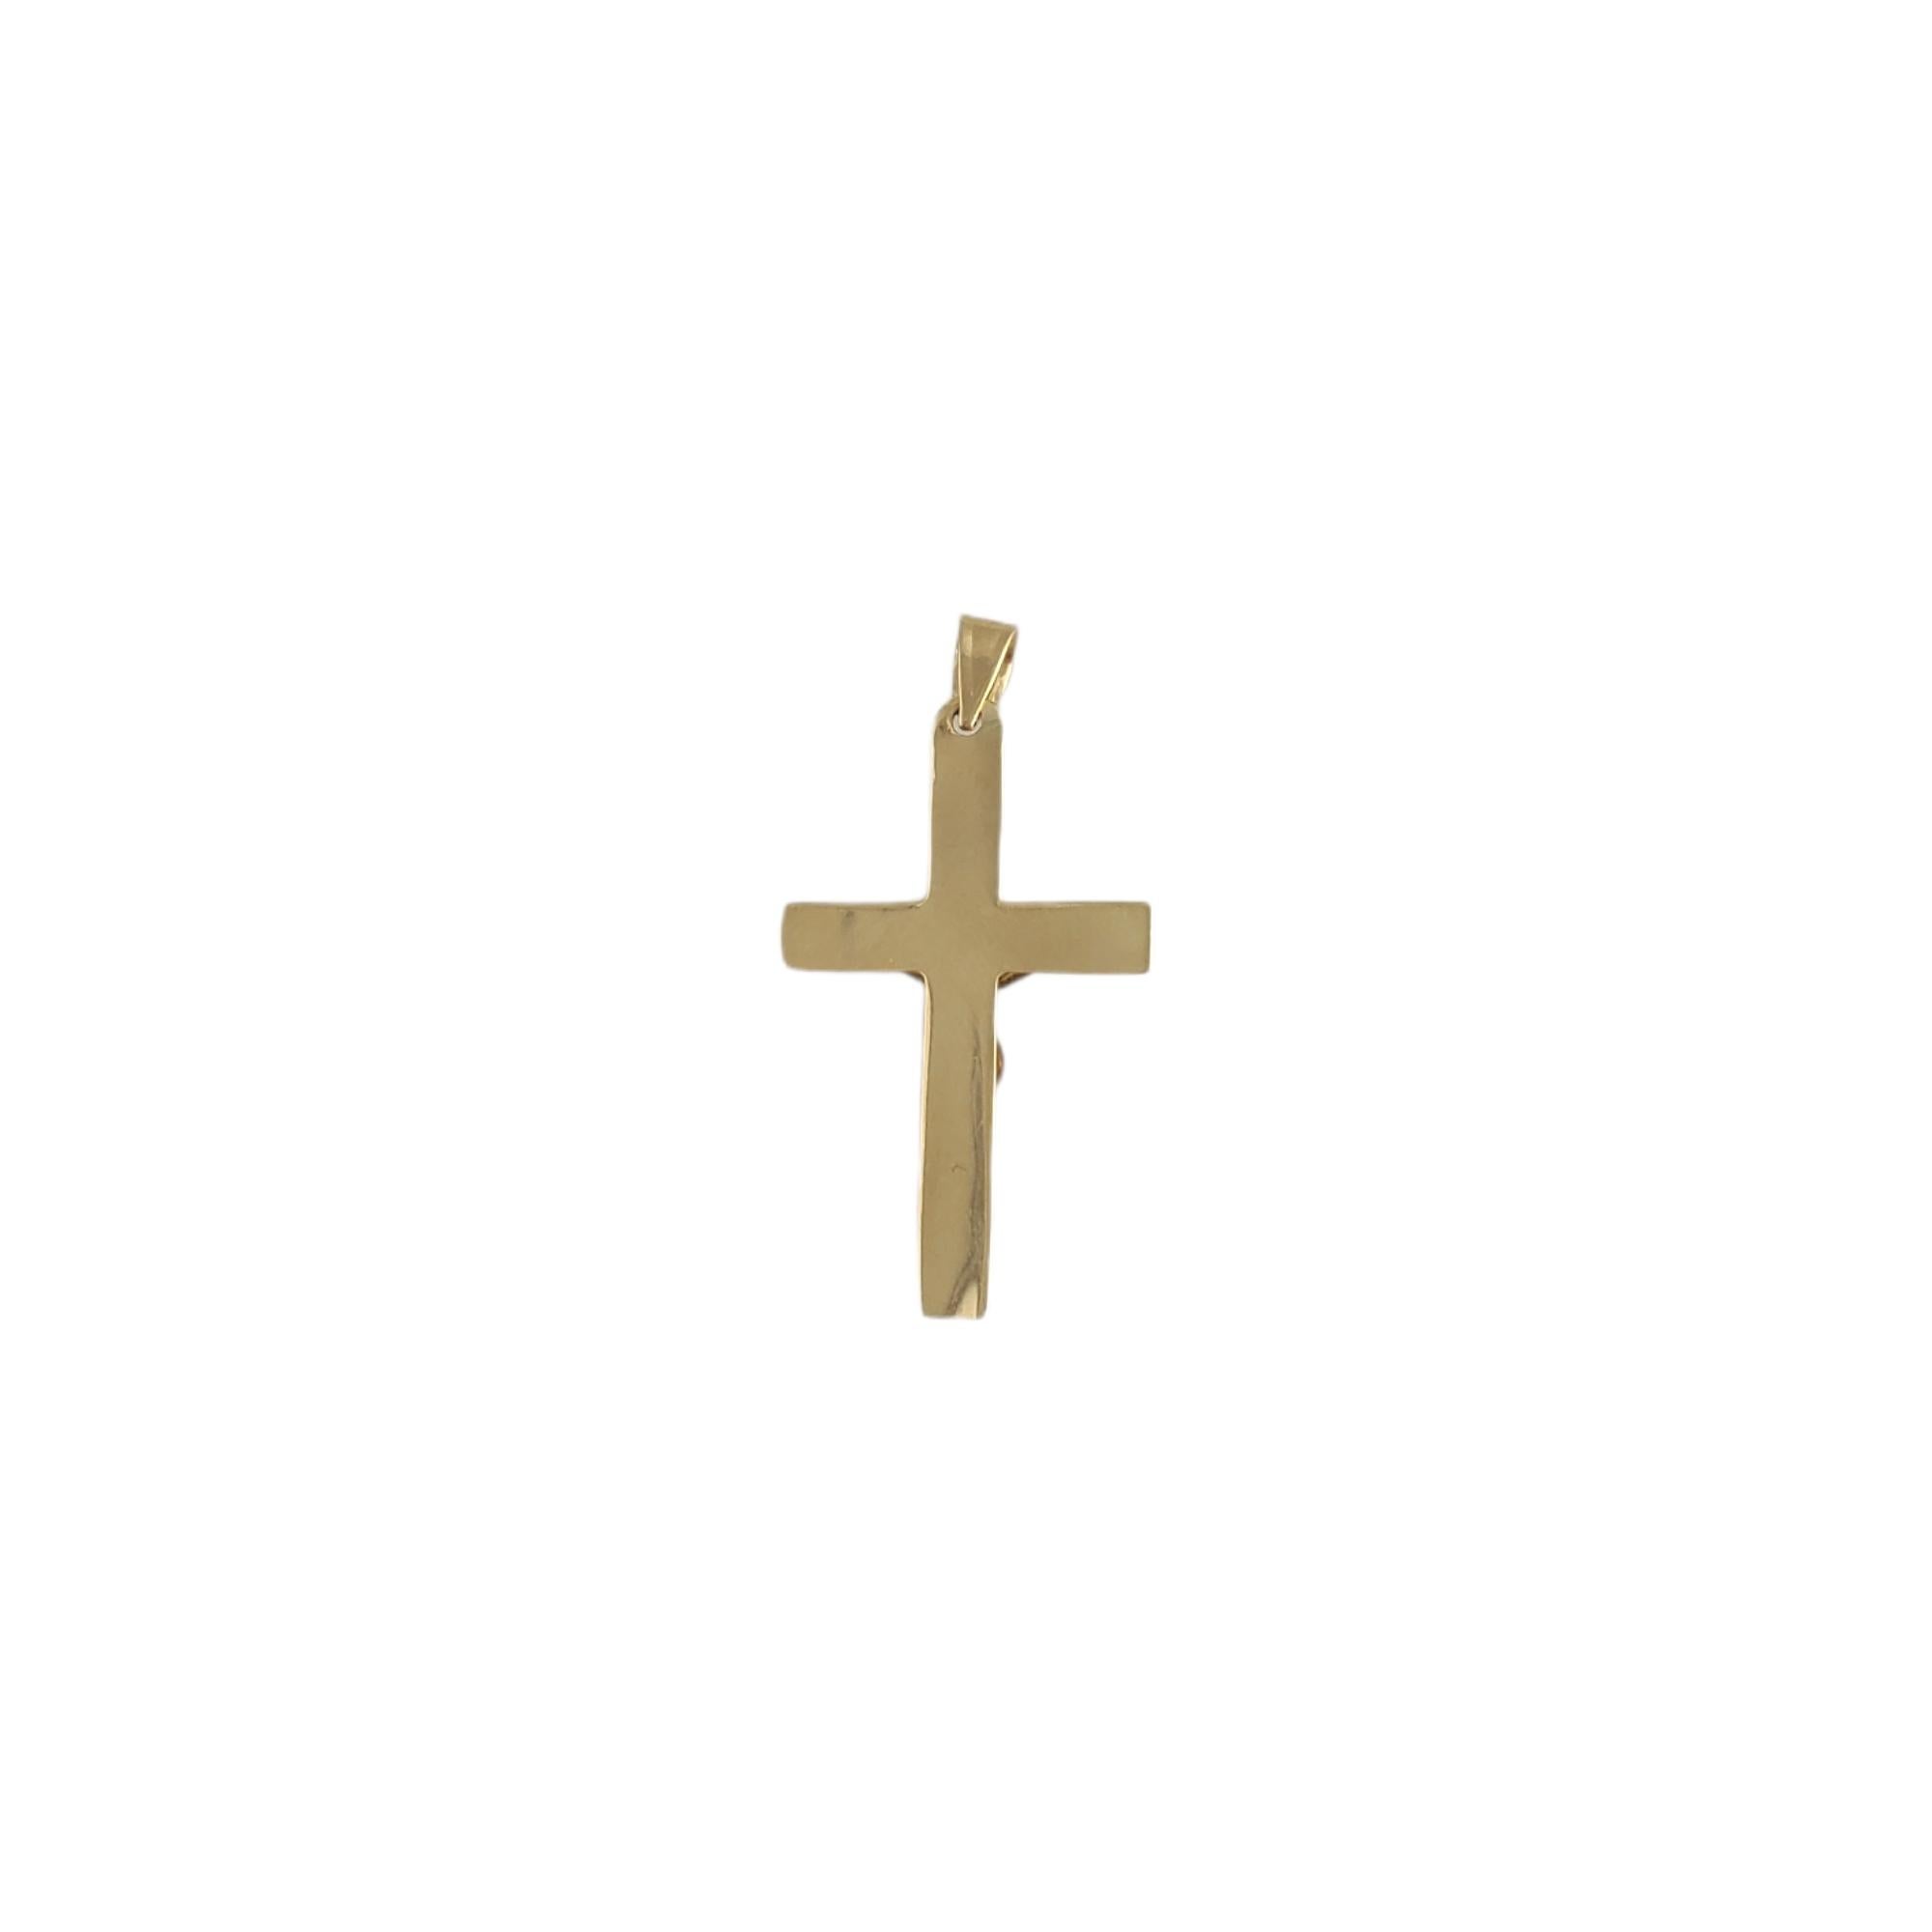 14K Yellow Gold Crucifix 

You'll love this beautiful 10K yellow gold crucifix!

Size: 17.60mm X 31.74mm

Weight: 0.7gr / 0.4dwt

Hallmark: 10K RL 

Very good condition, professionally polished.

Will come packaged in a gift box and will be shipped